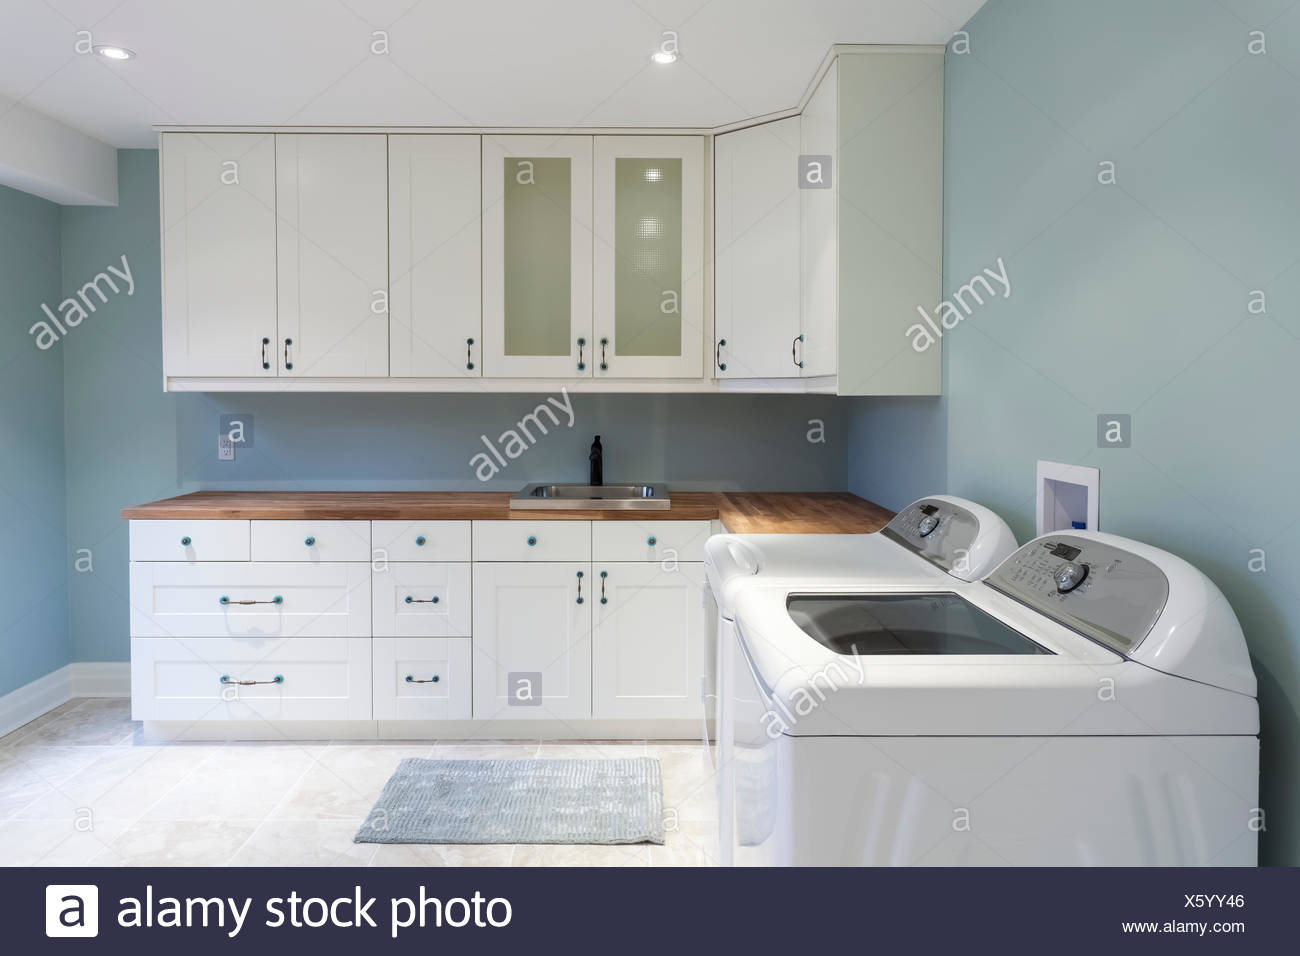 A New Residential Laundry Room With White Cabinets And Blue Walls